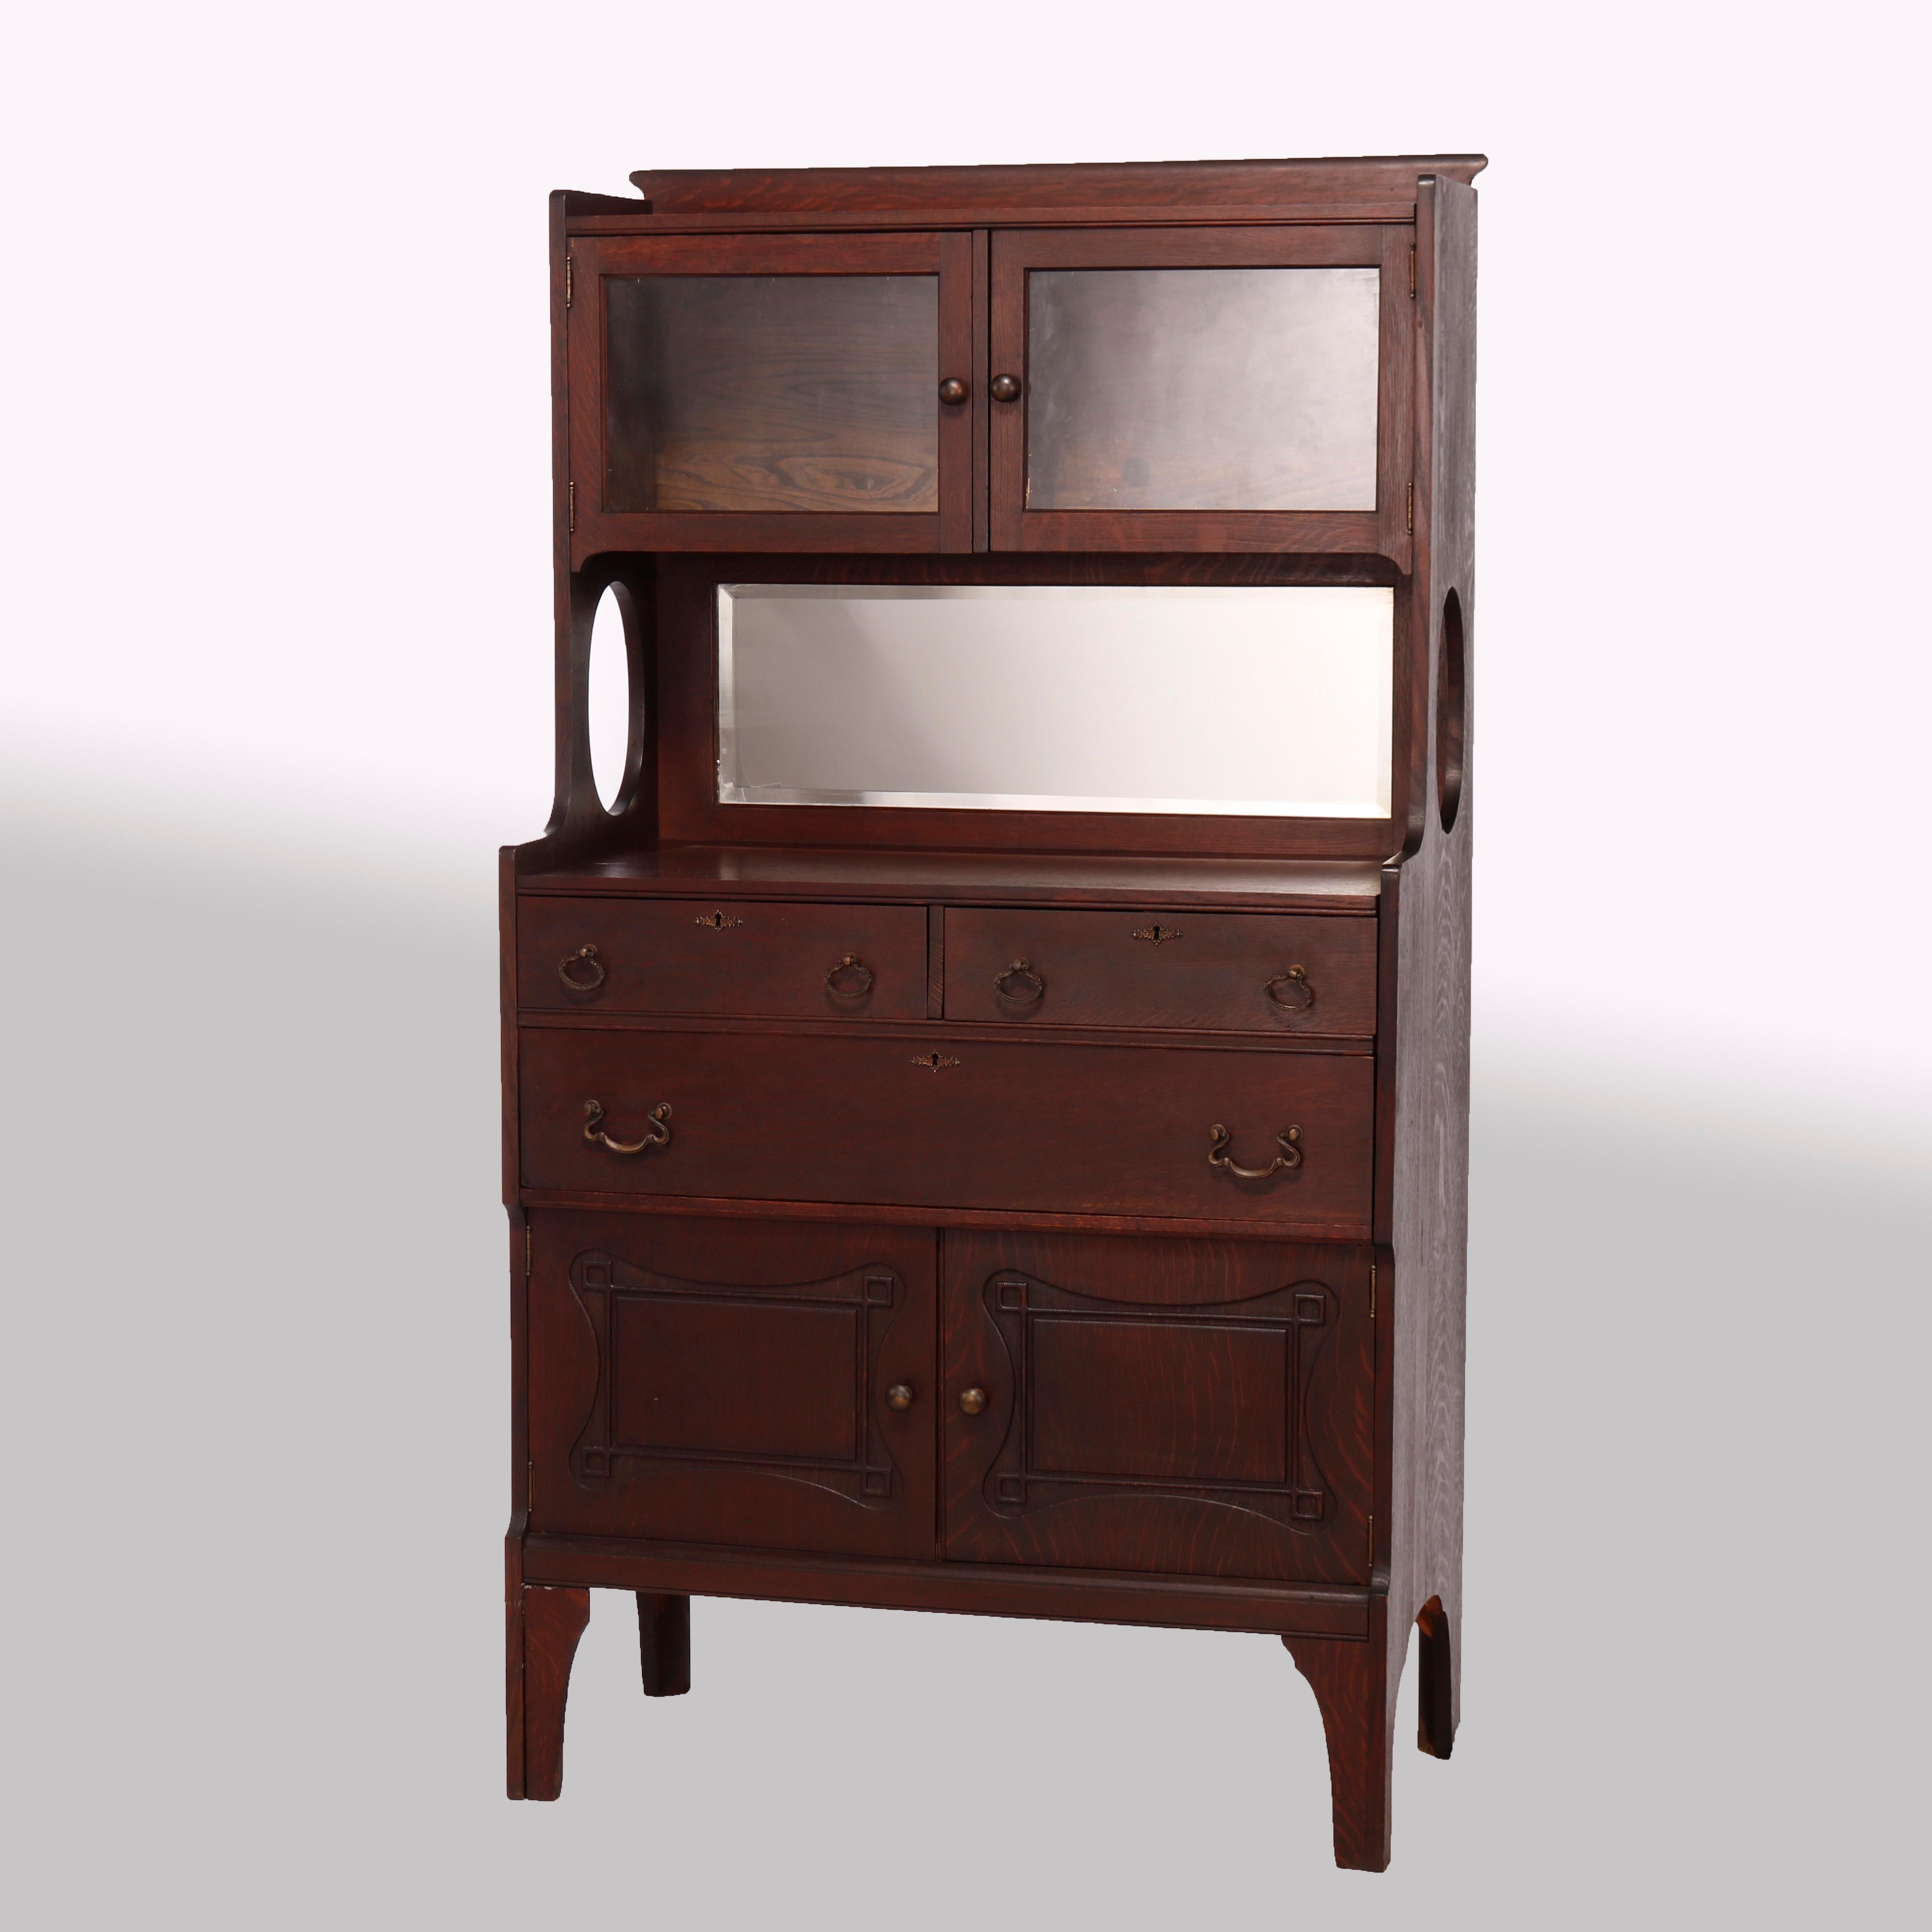 An antique Arts and Crafts Mission curio server offers quarter sawn oak construction with upper double glass door cabinet surmounting mirrored backsplash over lower case with double drawers over single long drawer and two blind cabinets having doors